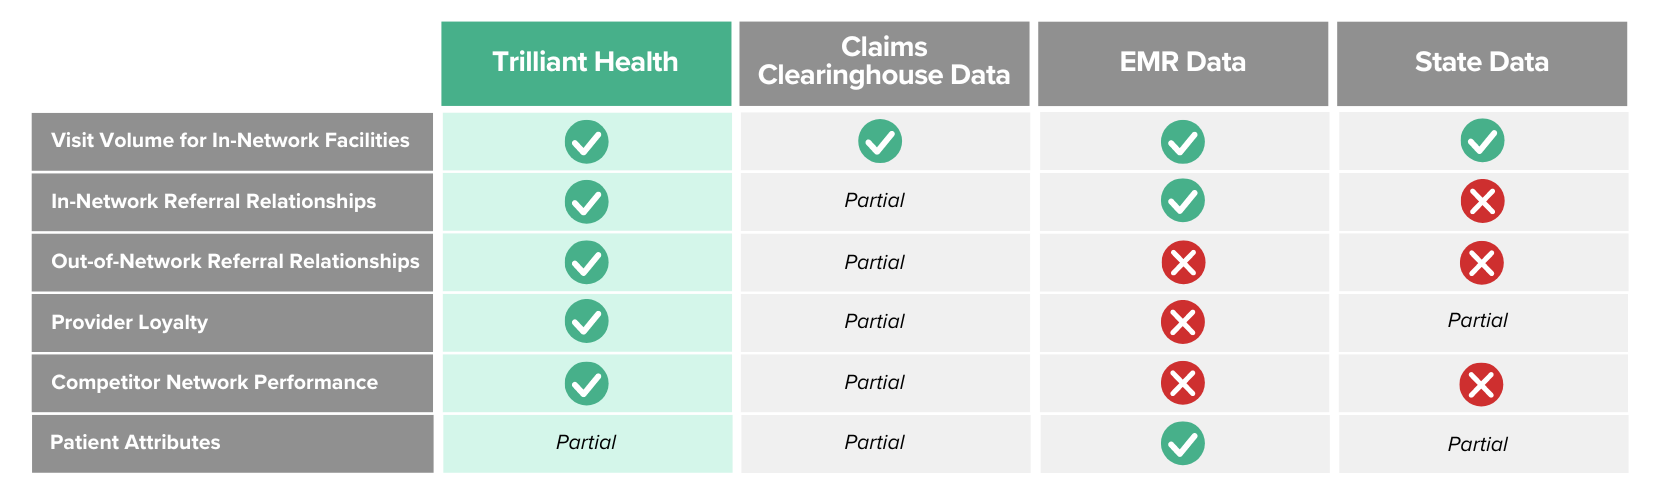 Chart comparing Trilliant Health features vs. claims clearinghouses, EMR data and state data